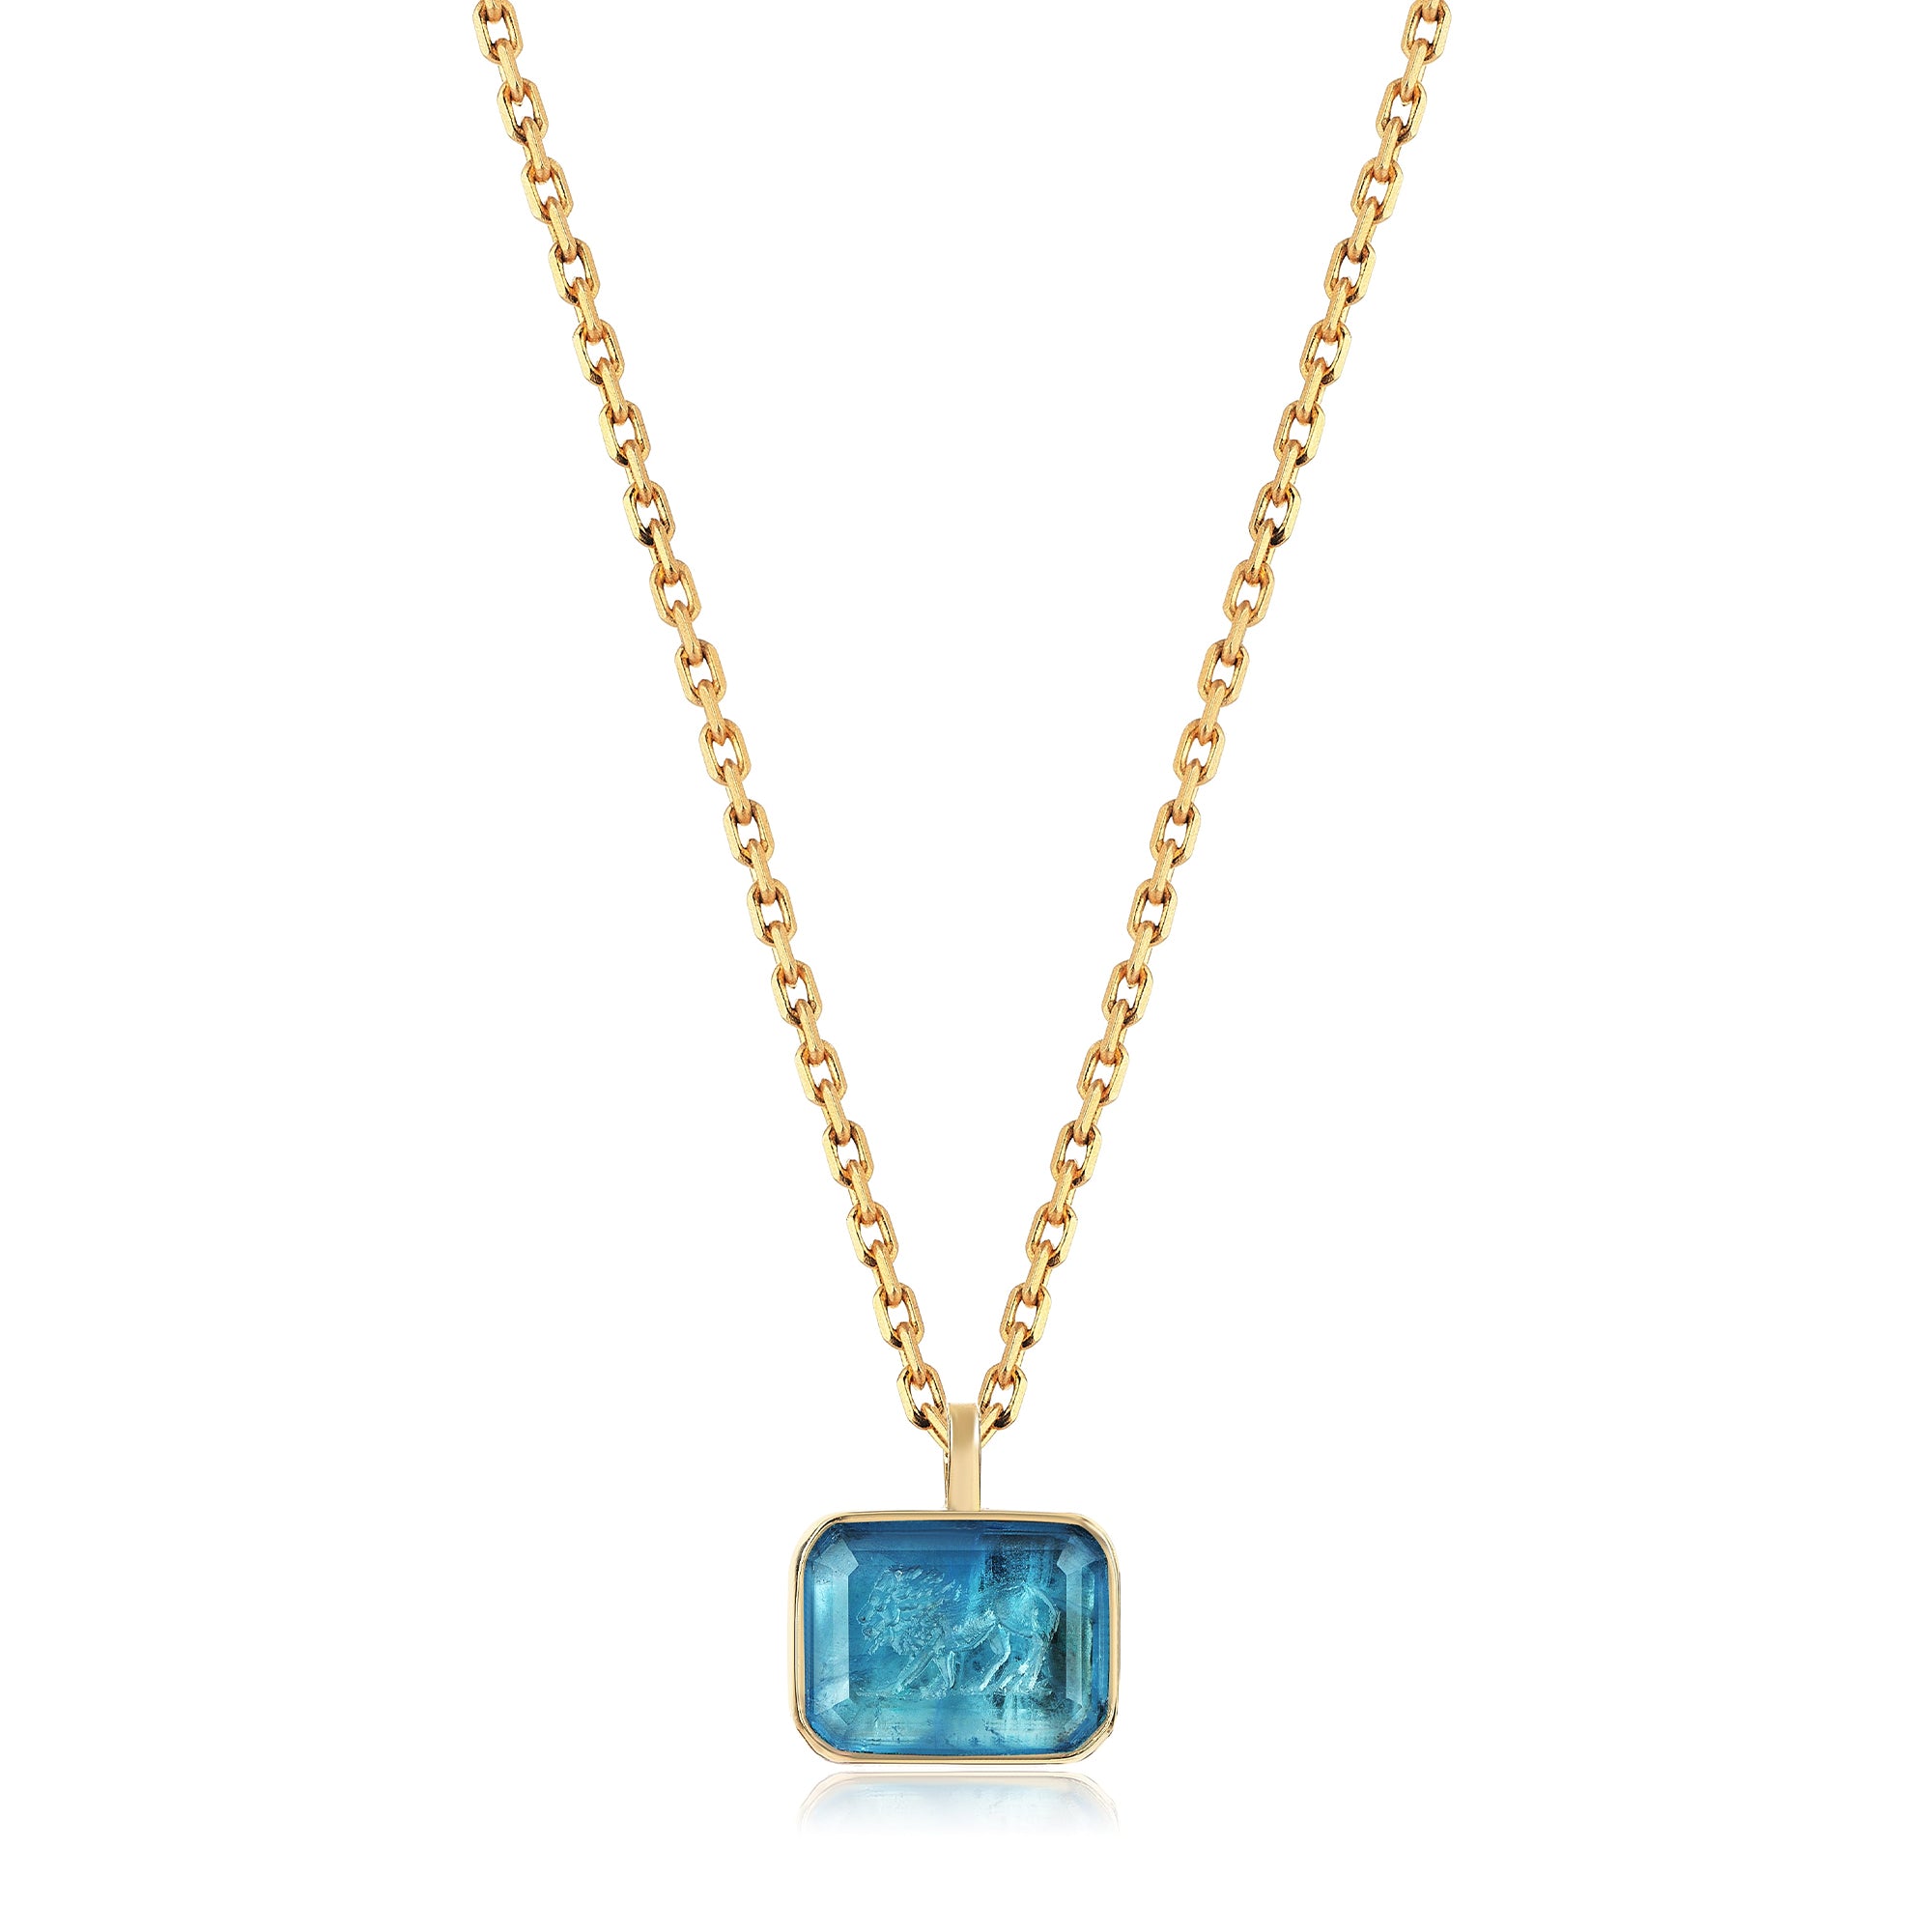 THE BLUE LEO NECKLACE